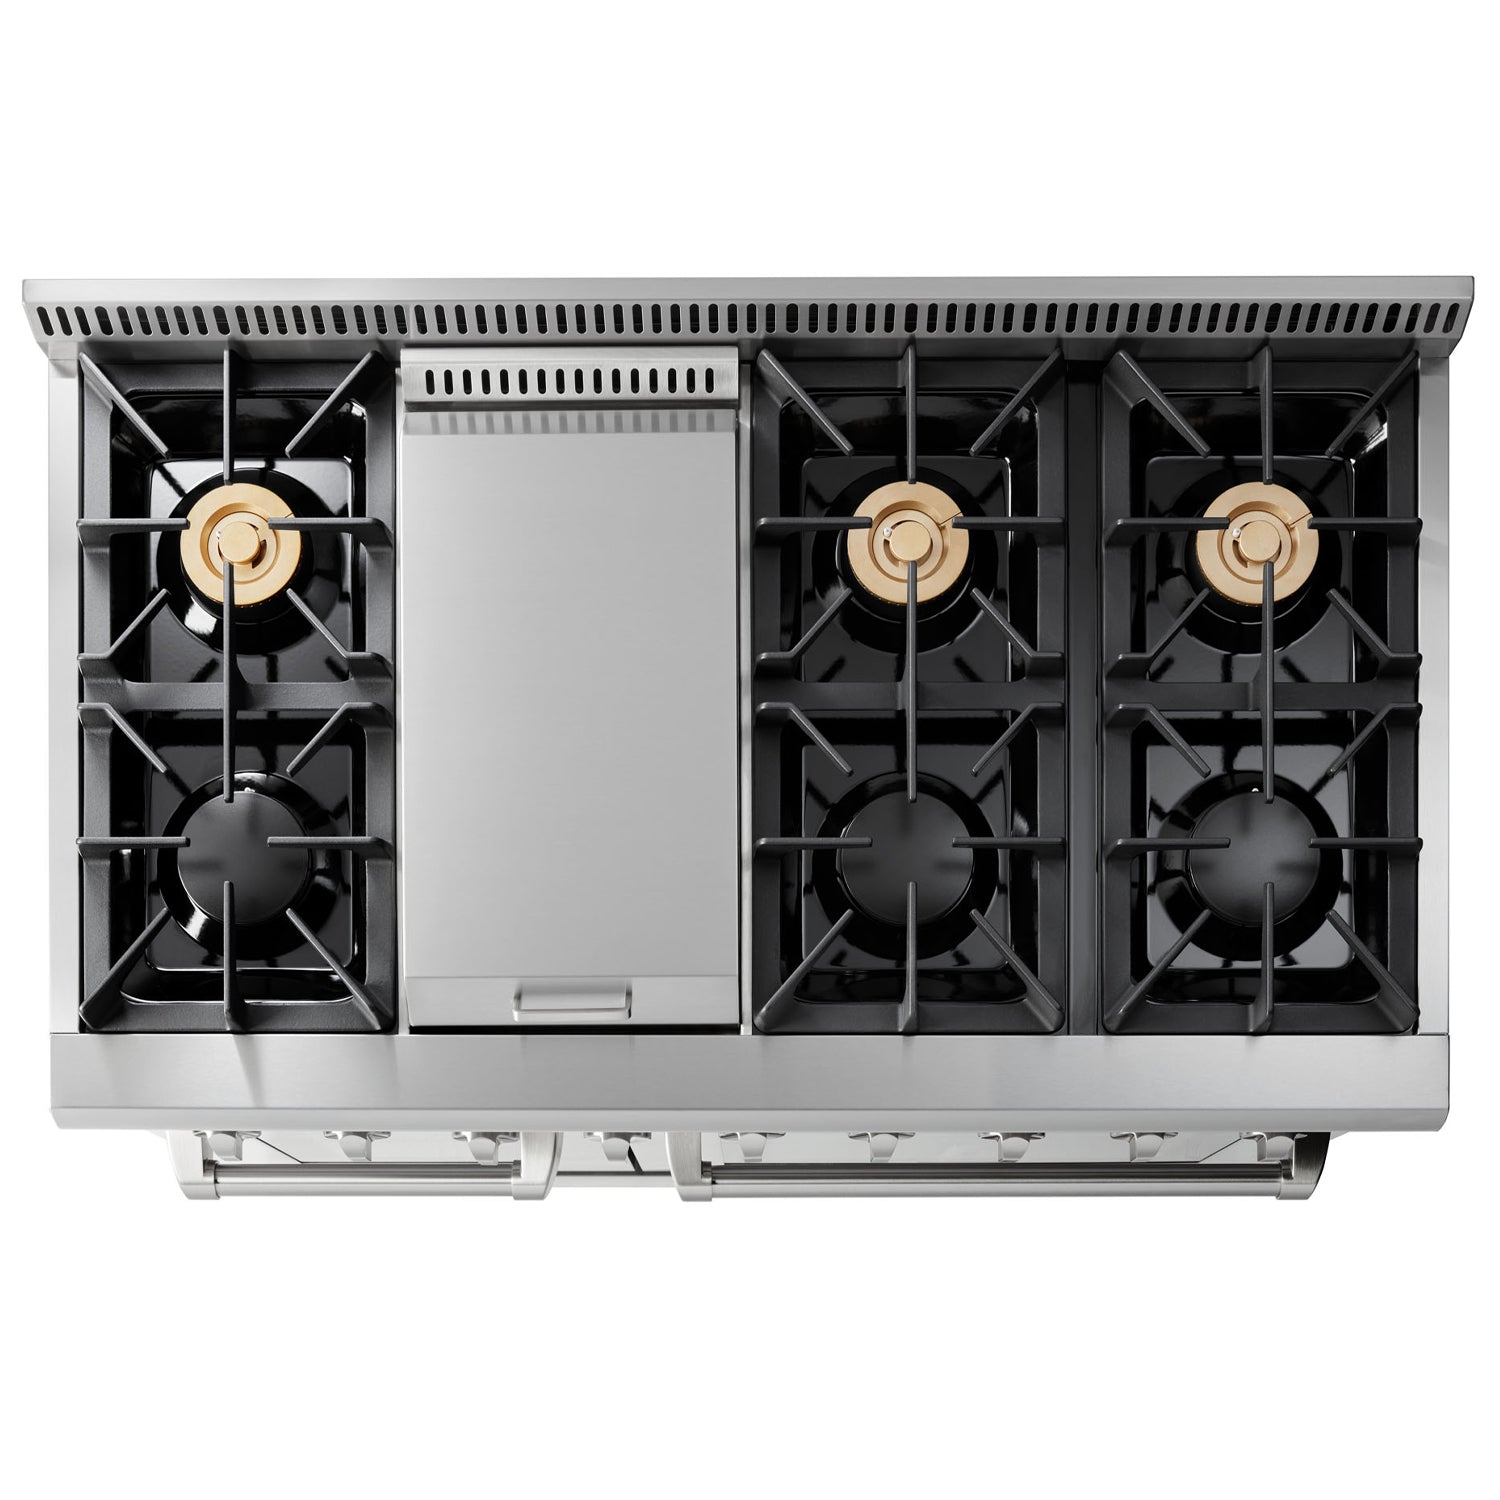 Thor Kitchen 2-Piece Pro Appliance Package - 48-Inch Gas Range & Under Cabinet 16.5-Inch Tall Hood in Stainless Steel